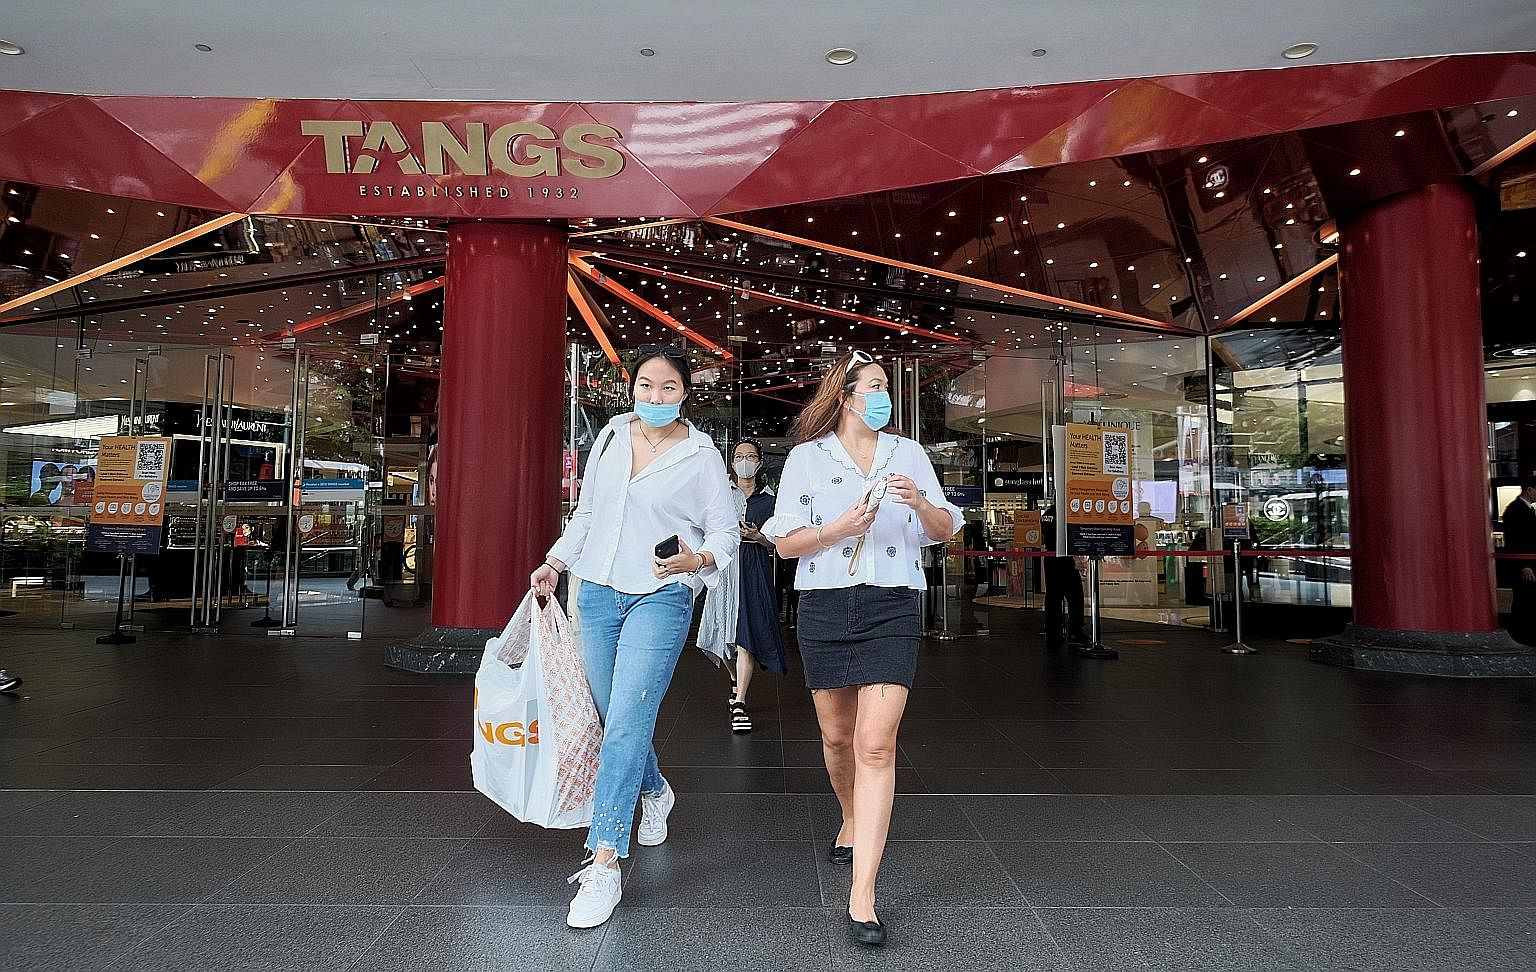 The city came alive again yesterday, the first day of phase two of Singapore's reopening. (From top) People thronging the streets of Orchard Road, albeit wearing face masks; shoppers leaving Tangs department store with their purchases; and customers 